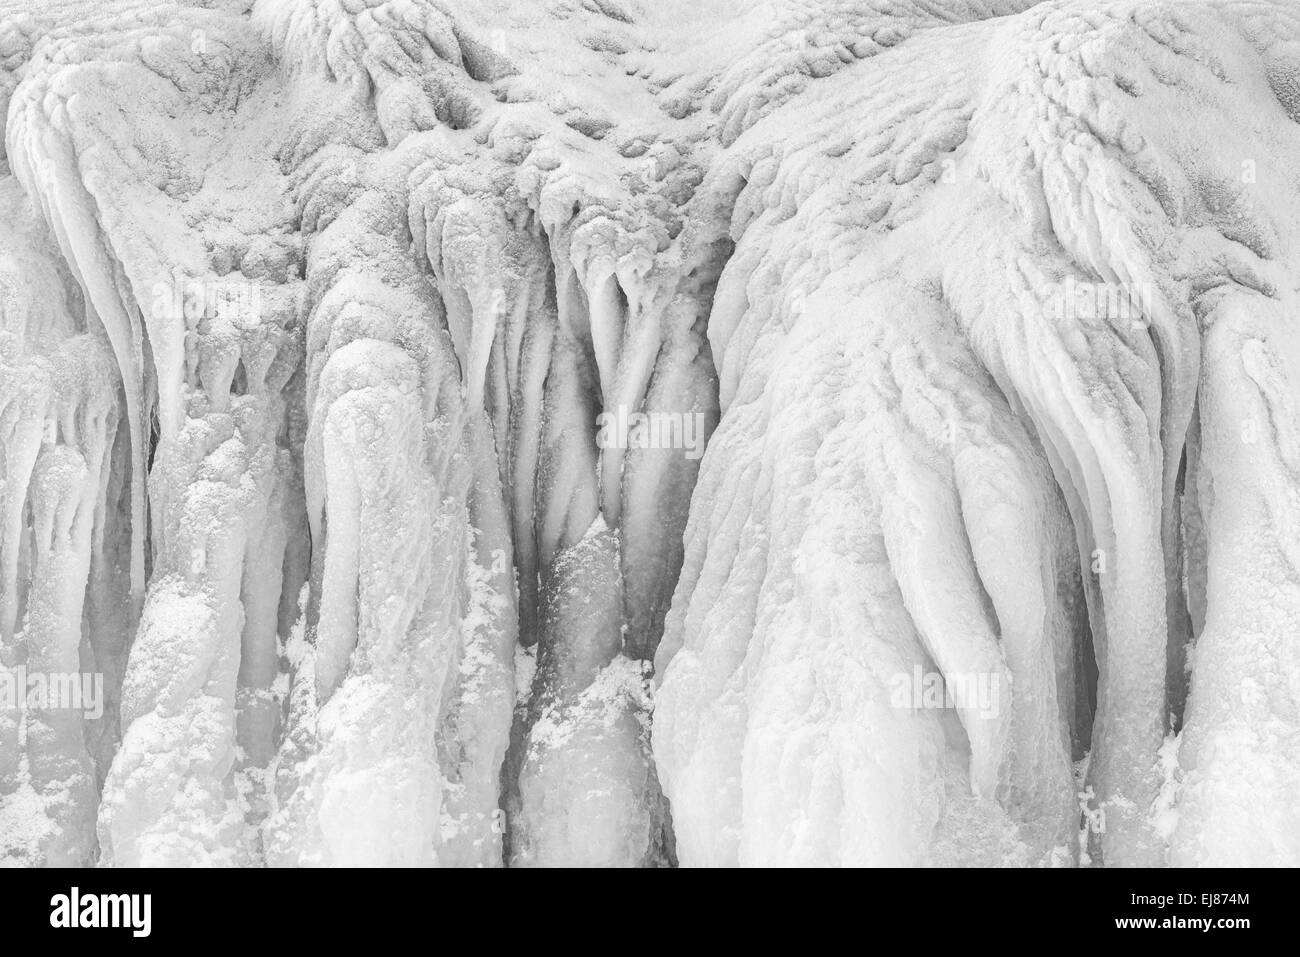 Ice structures, Lapland, Sweden Stock Photo